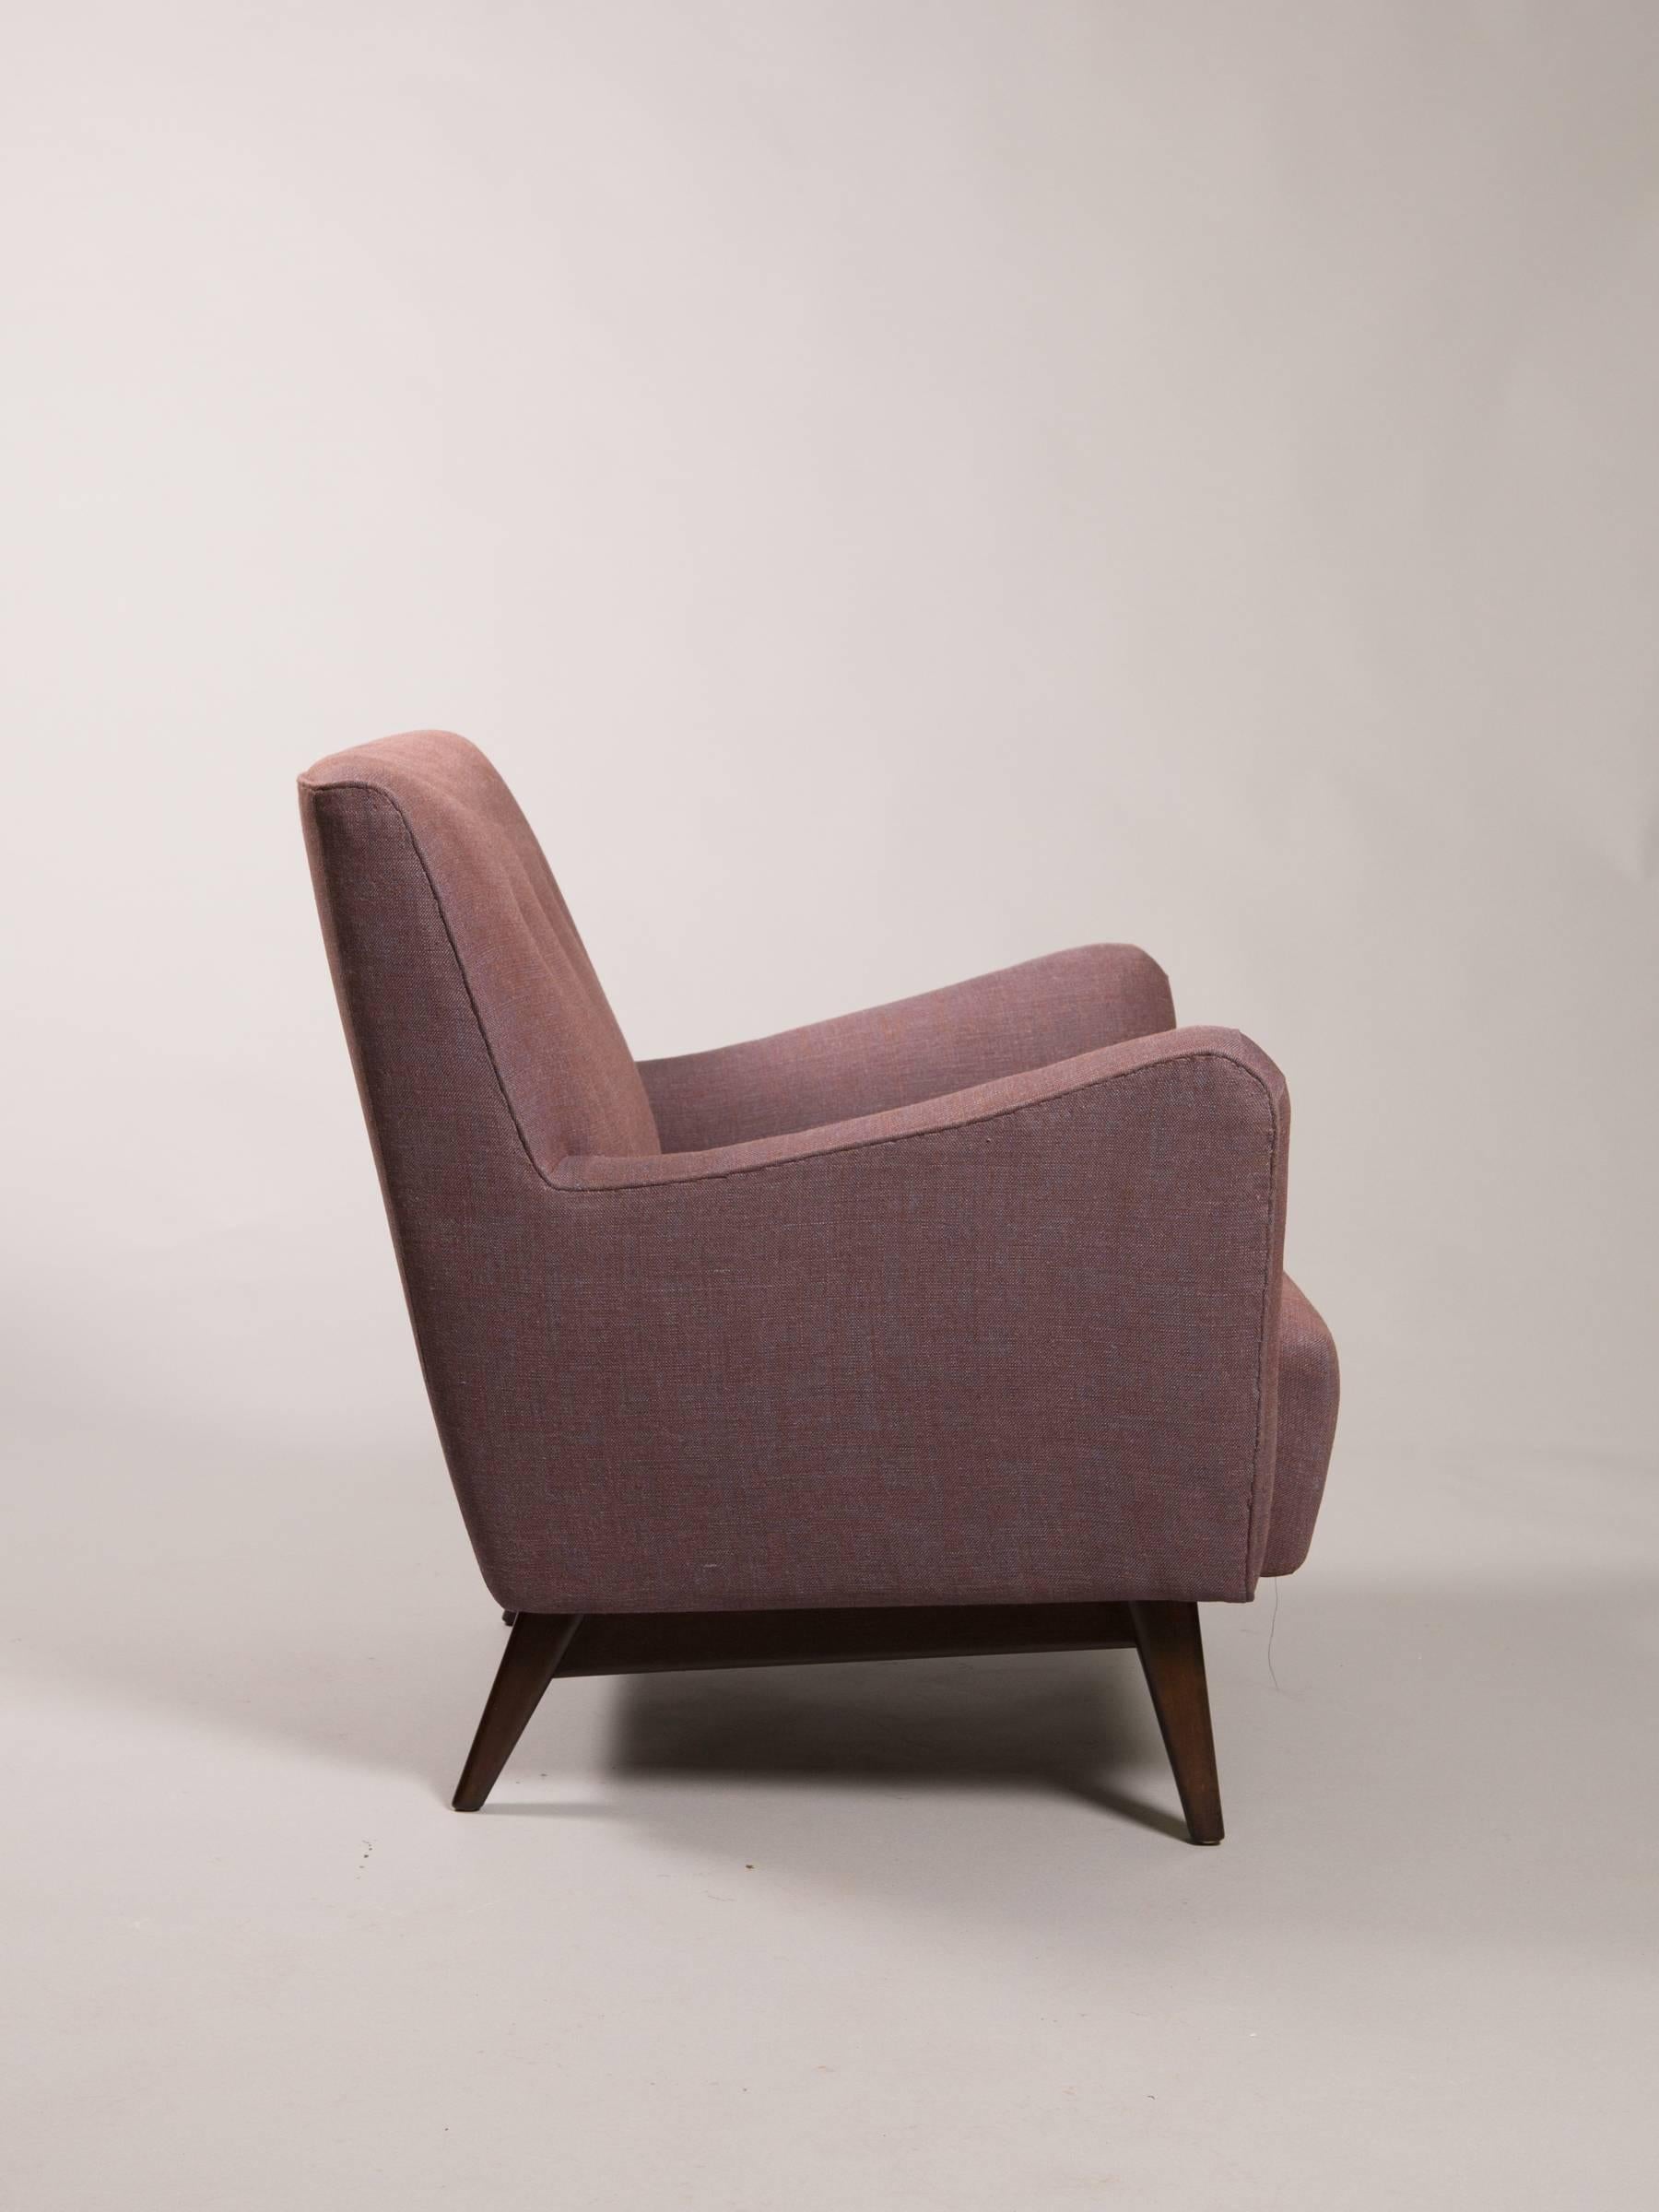 Fully restored and newly upholstered Jens Risom attributed armchair with gently curved arms and button tufting on the back.
Measures: Seat depth - 20.5